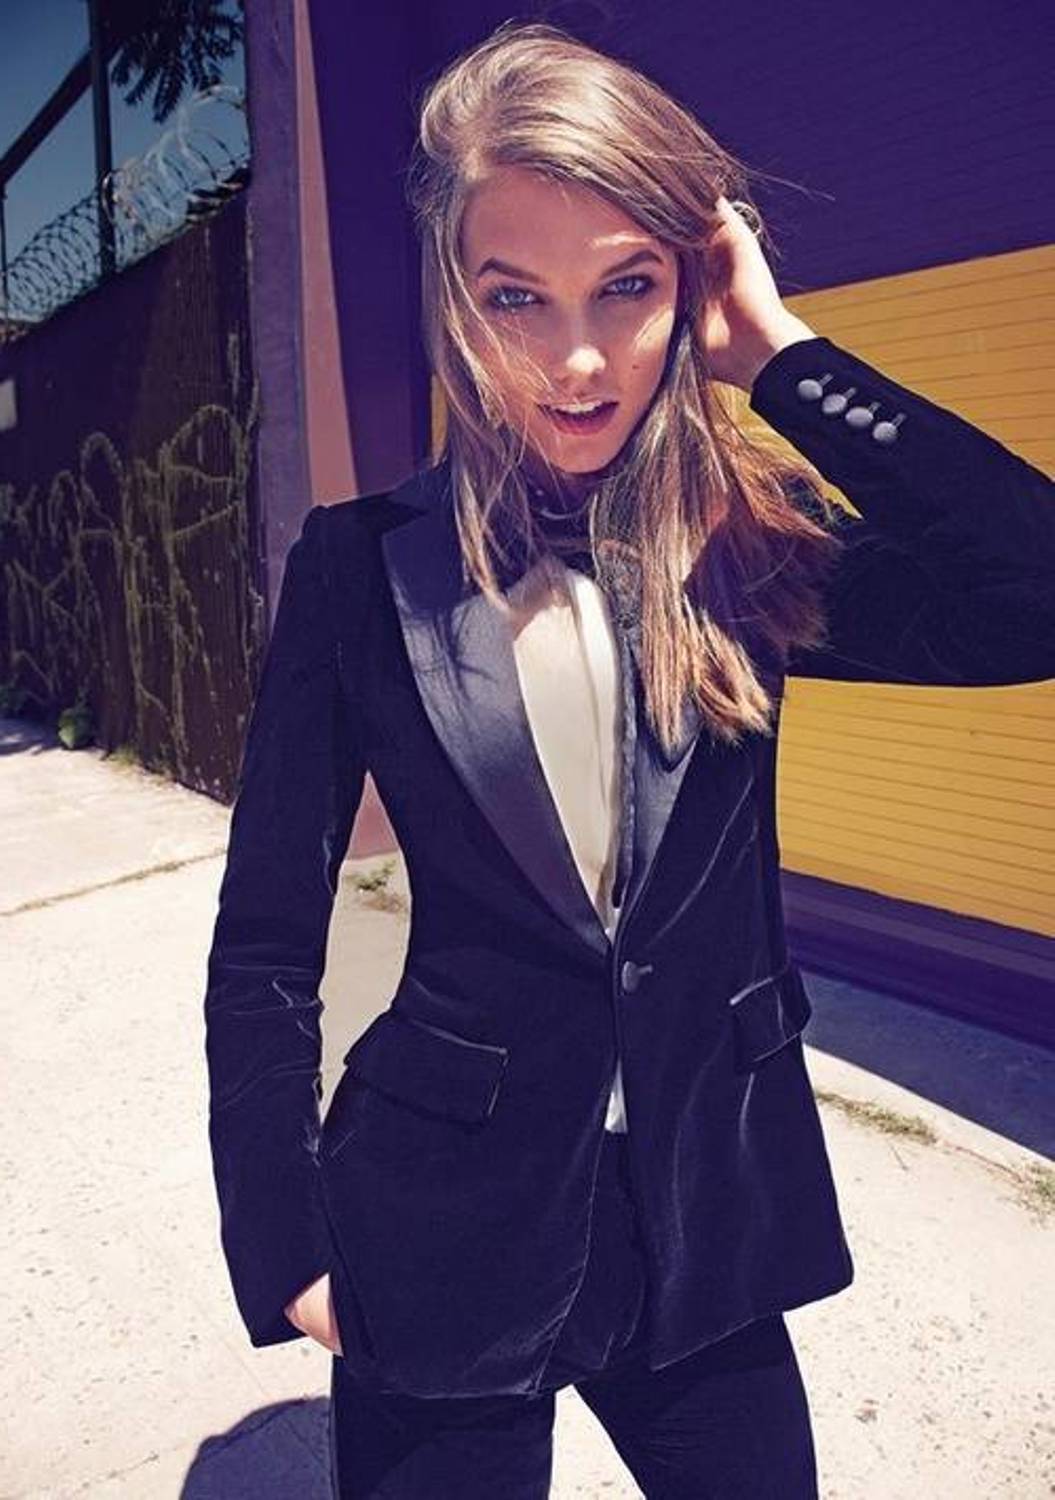 The Tuxedo style is always a great look for women (think satin, velvet, crepe, etc.)